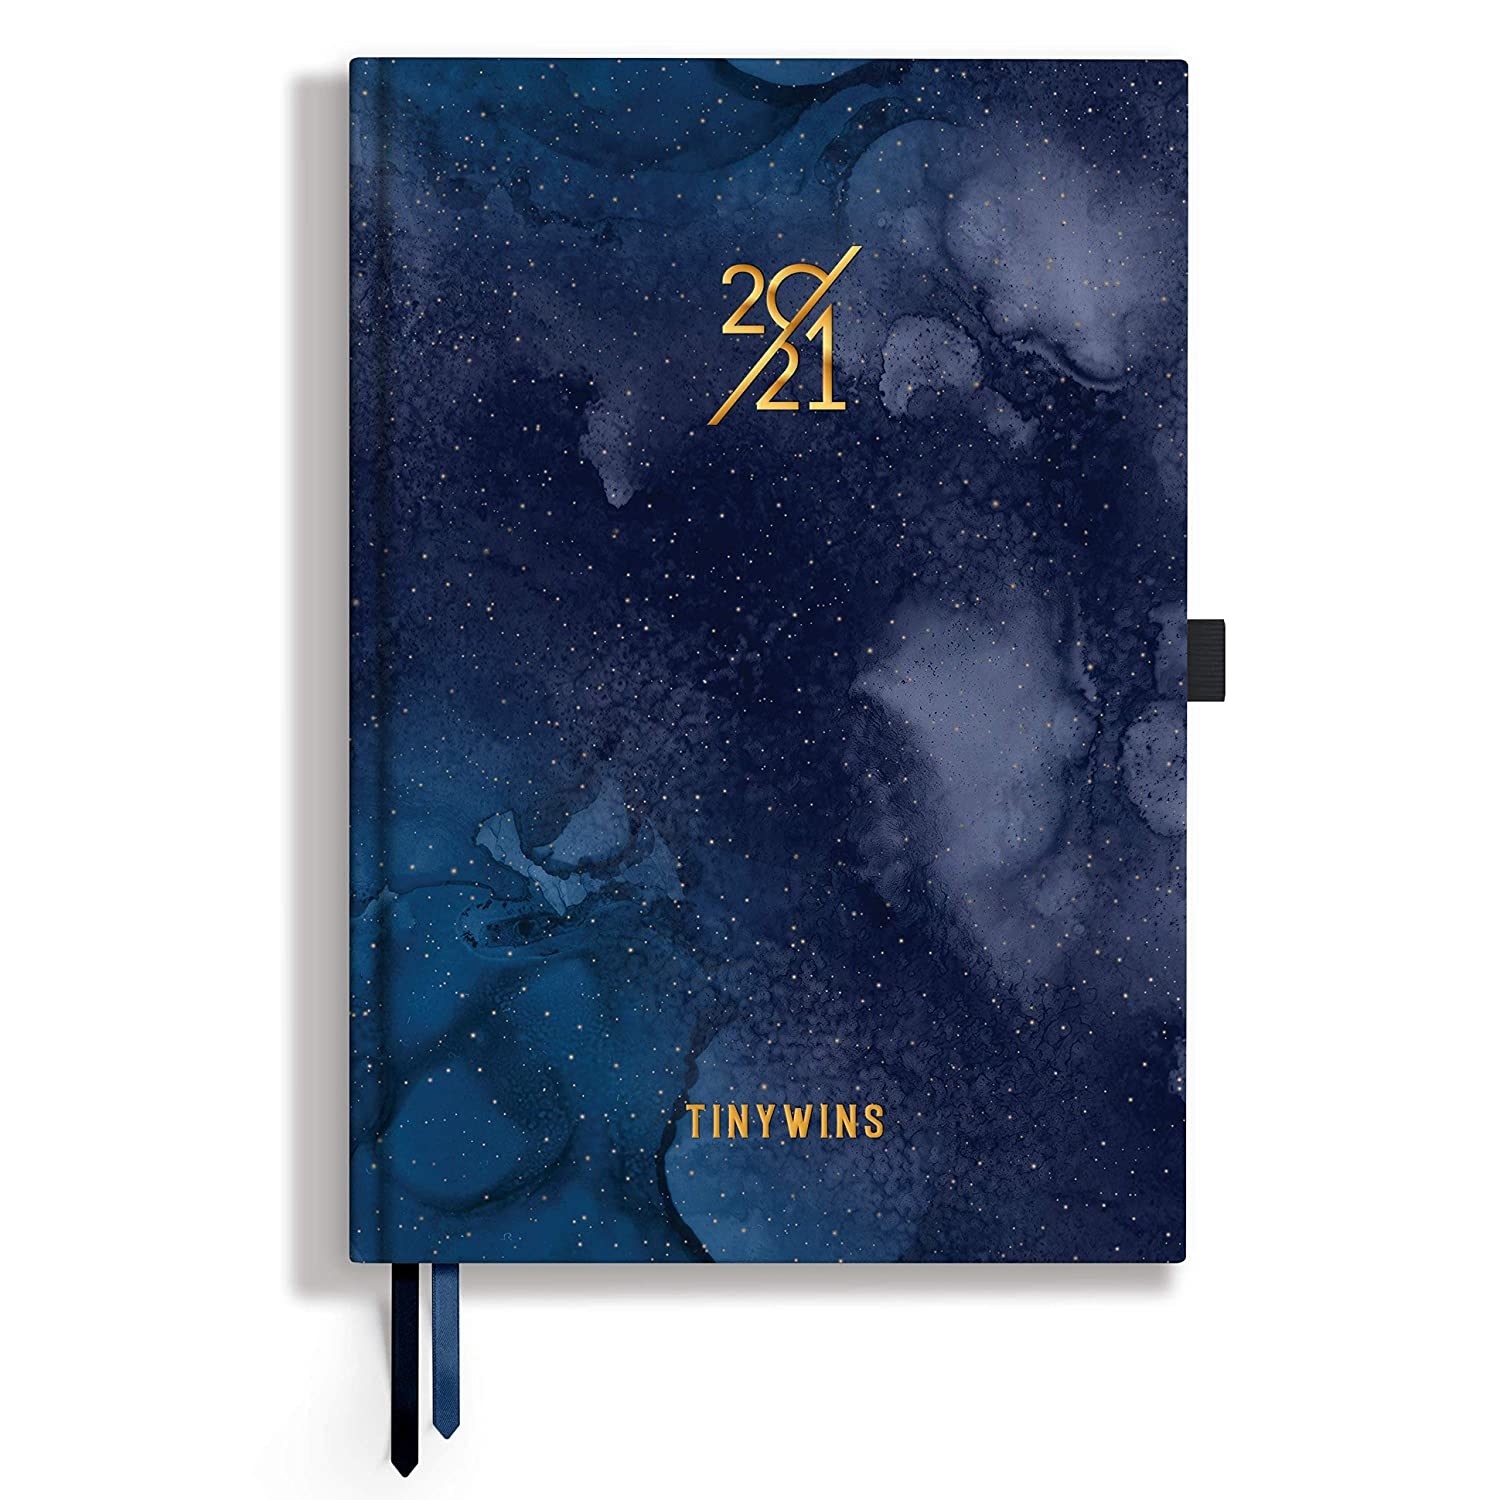 2021 planner with a starry cover